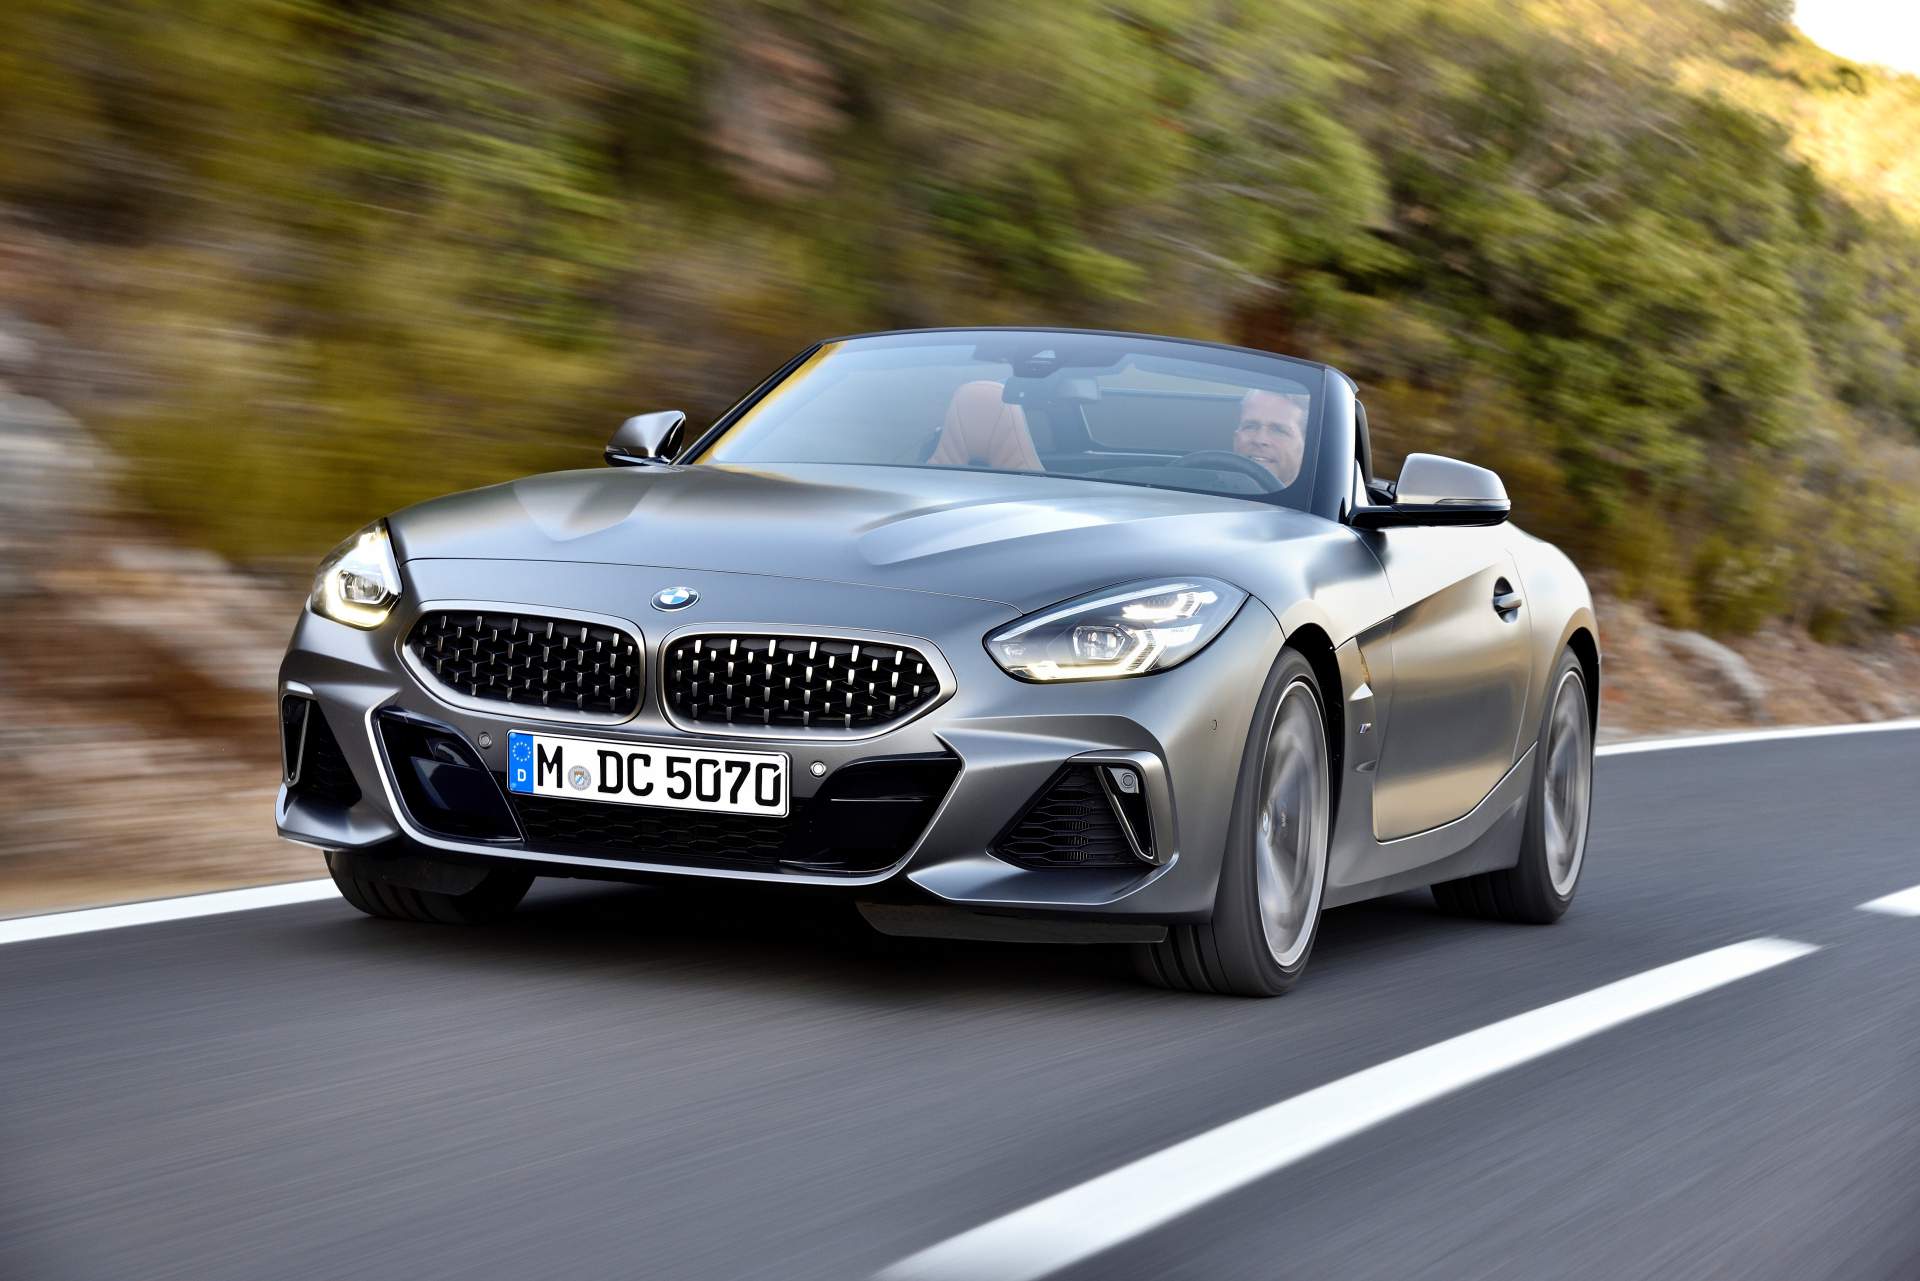 2019 BMW Z4 M40i Launched – Media Gallery Reveals Beauty at Its Finest